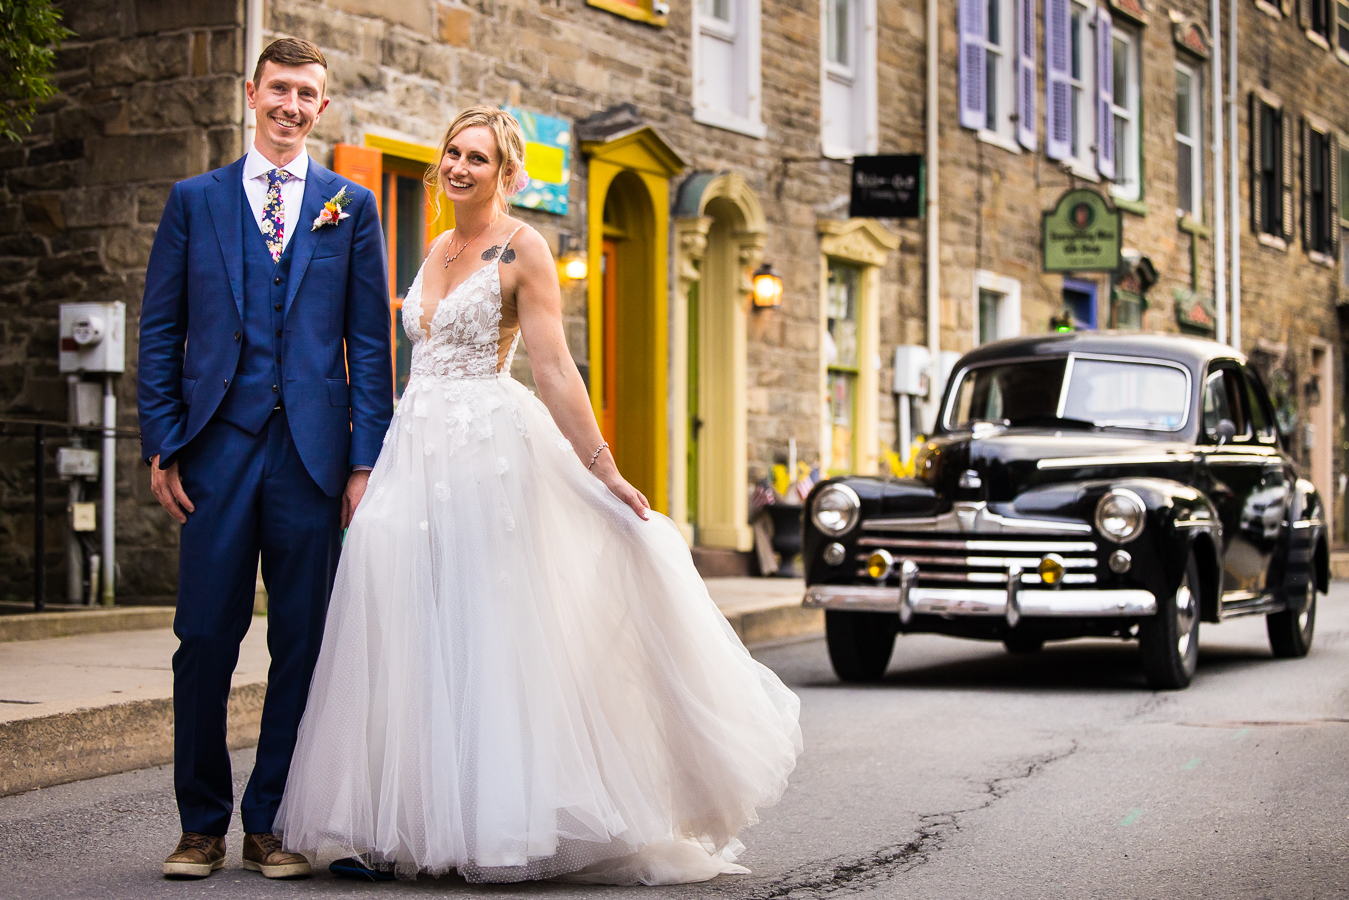 creative jim thorpe wedding photographer, lisa rhinehart, captures this image of the bride and groom holding hands and standing next to each other with a unique, old car in the background and vibrant colorful doors mixed in amongst the stone wall 